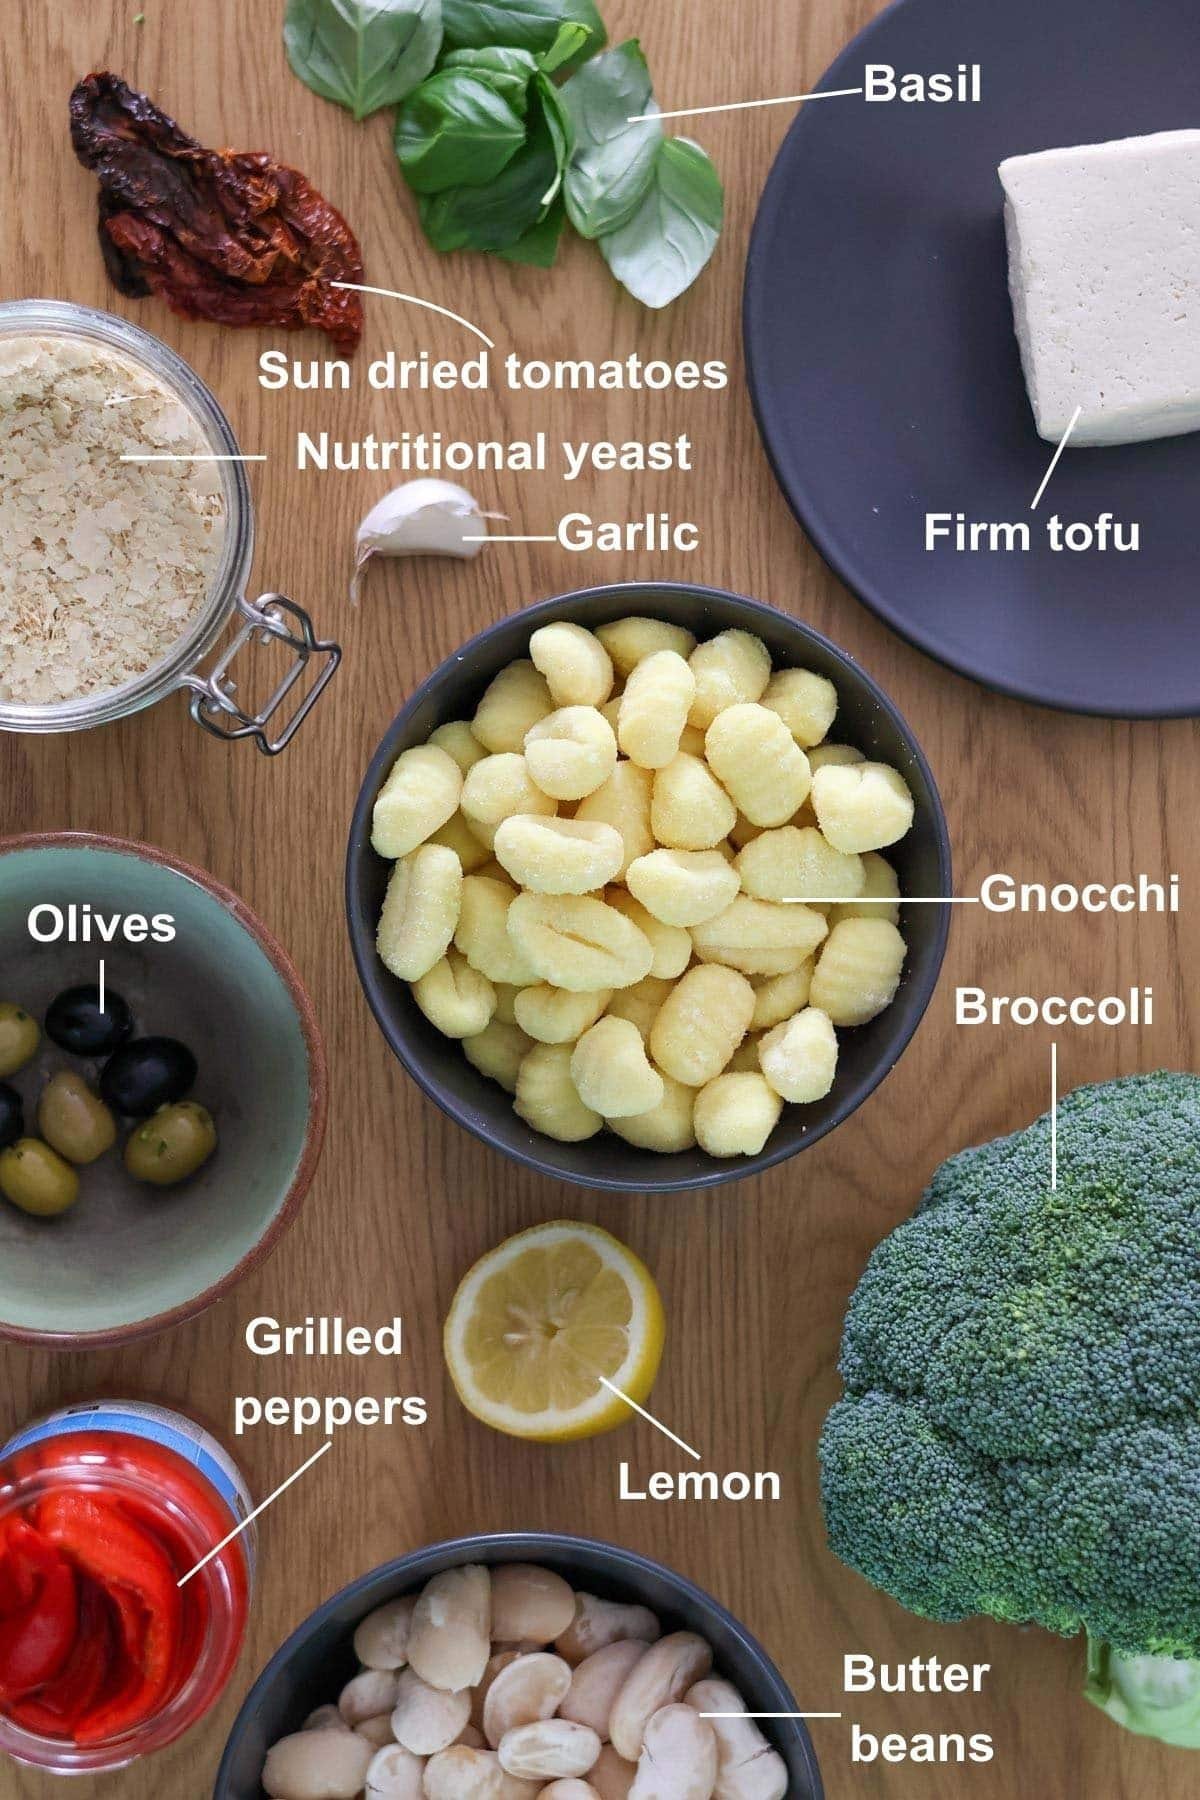 All of the ingredients for the Easy Oven-Baked Vegan Gnocchi recipe on a wooden table.